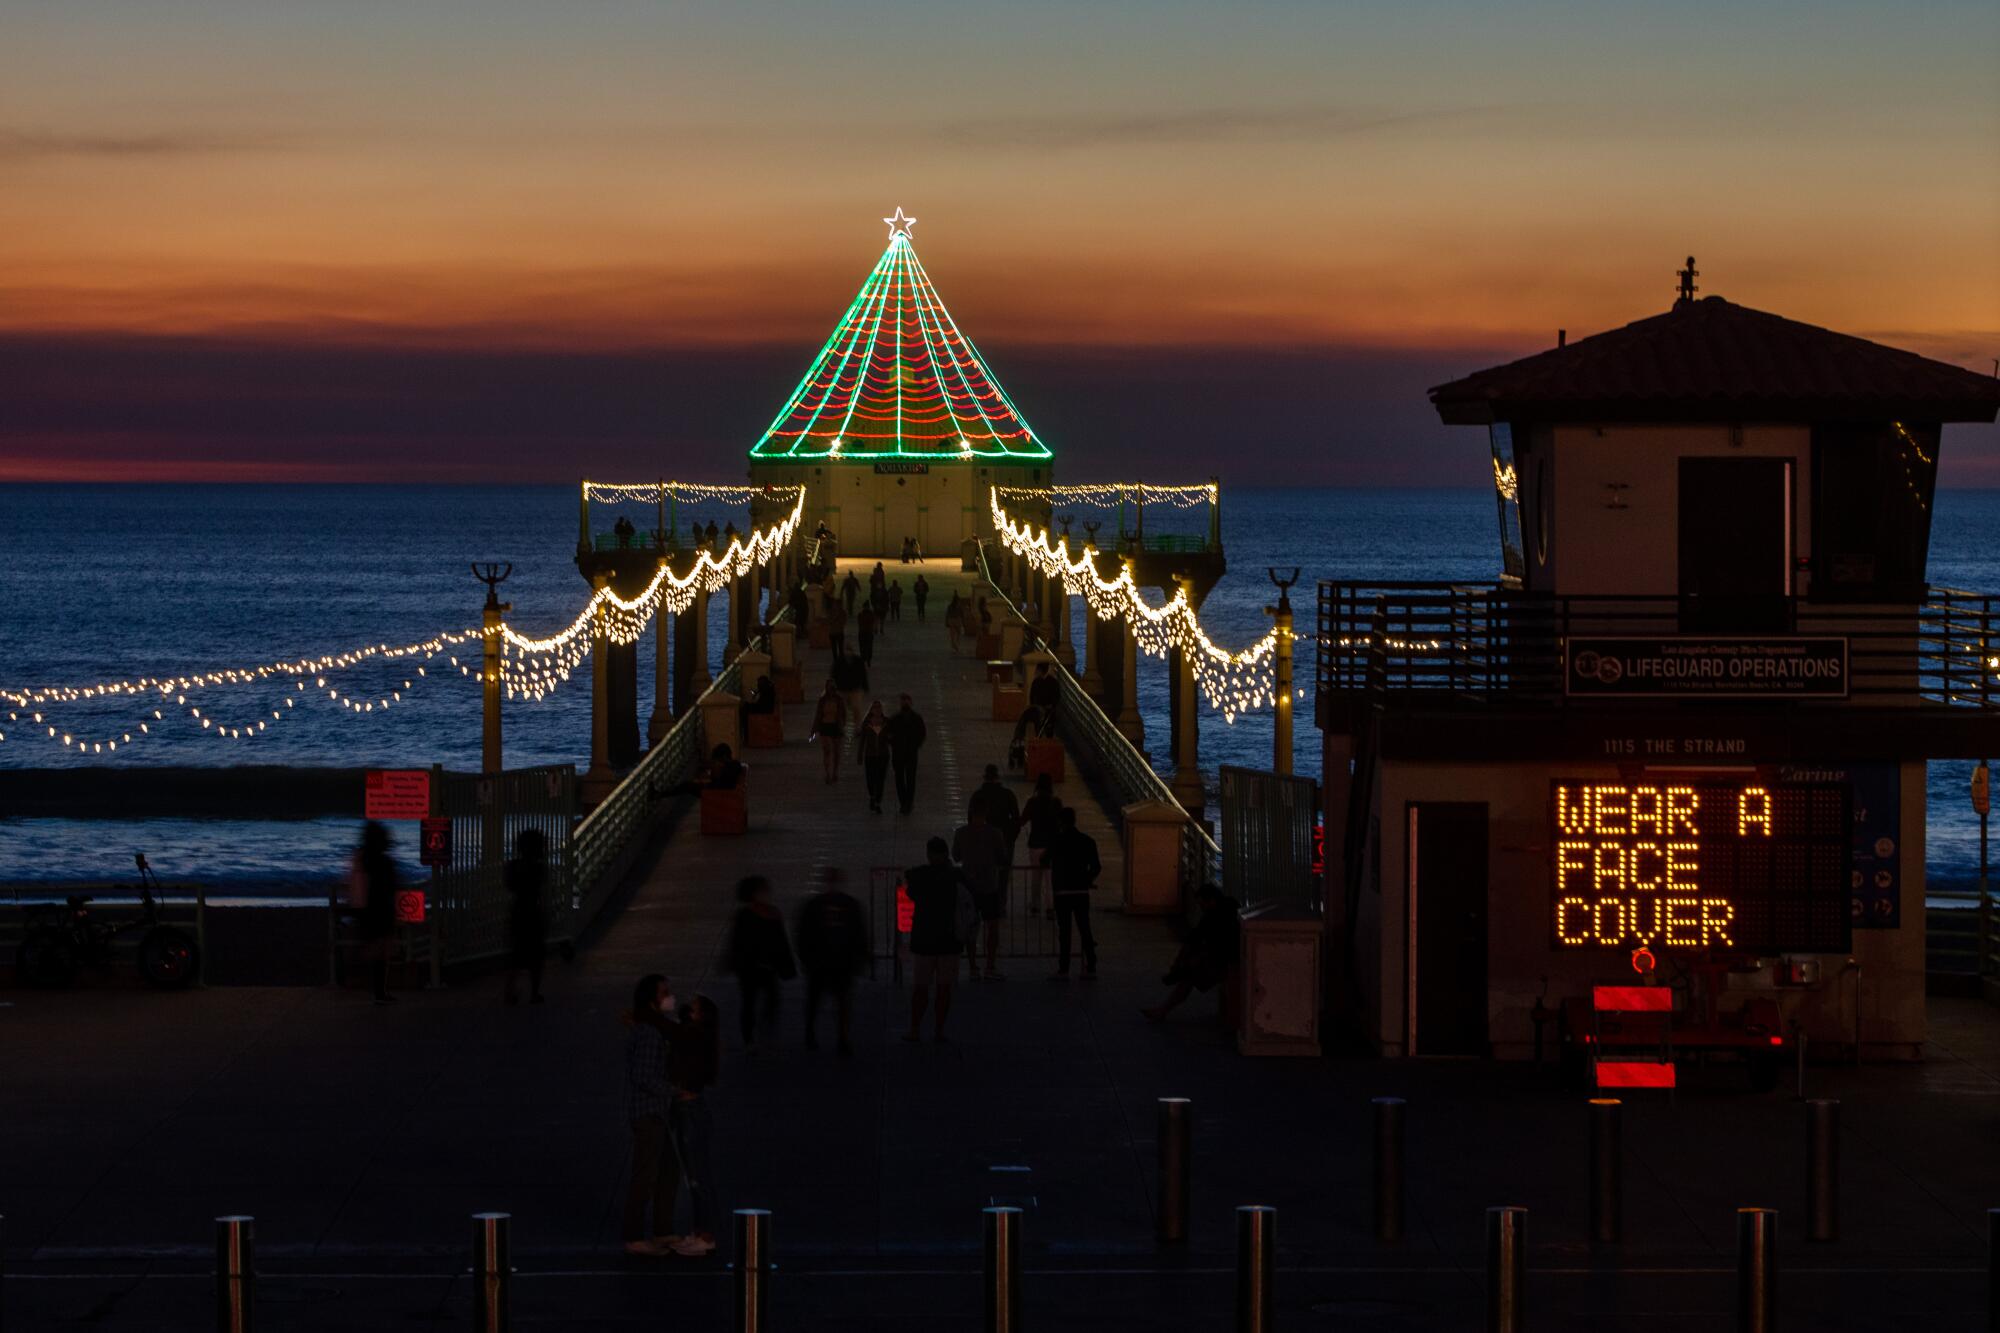 Holiday lights cover a pier at sunset as an electric sign reads "Wear a face cover."